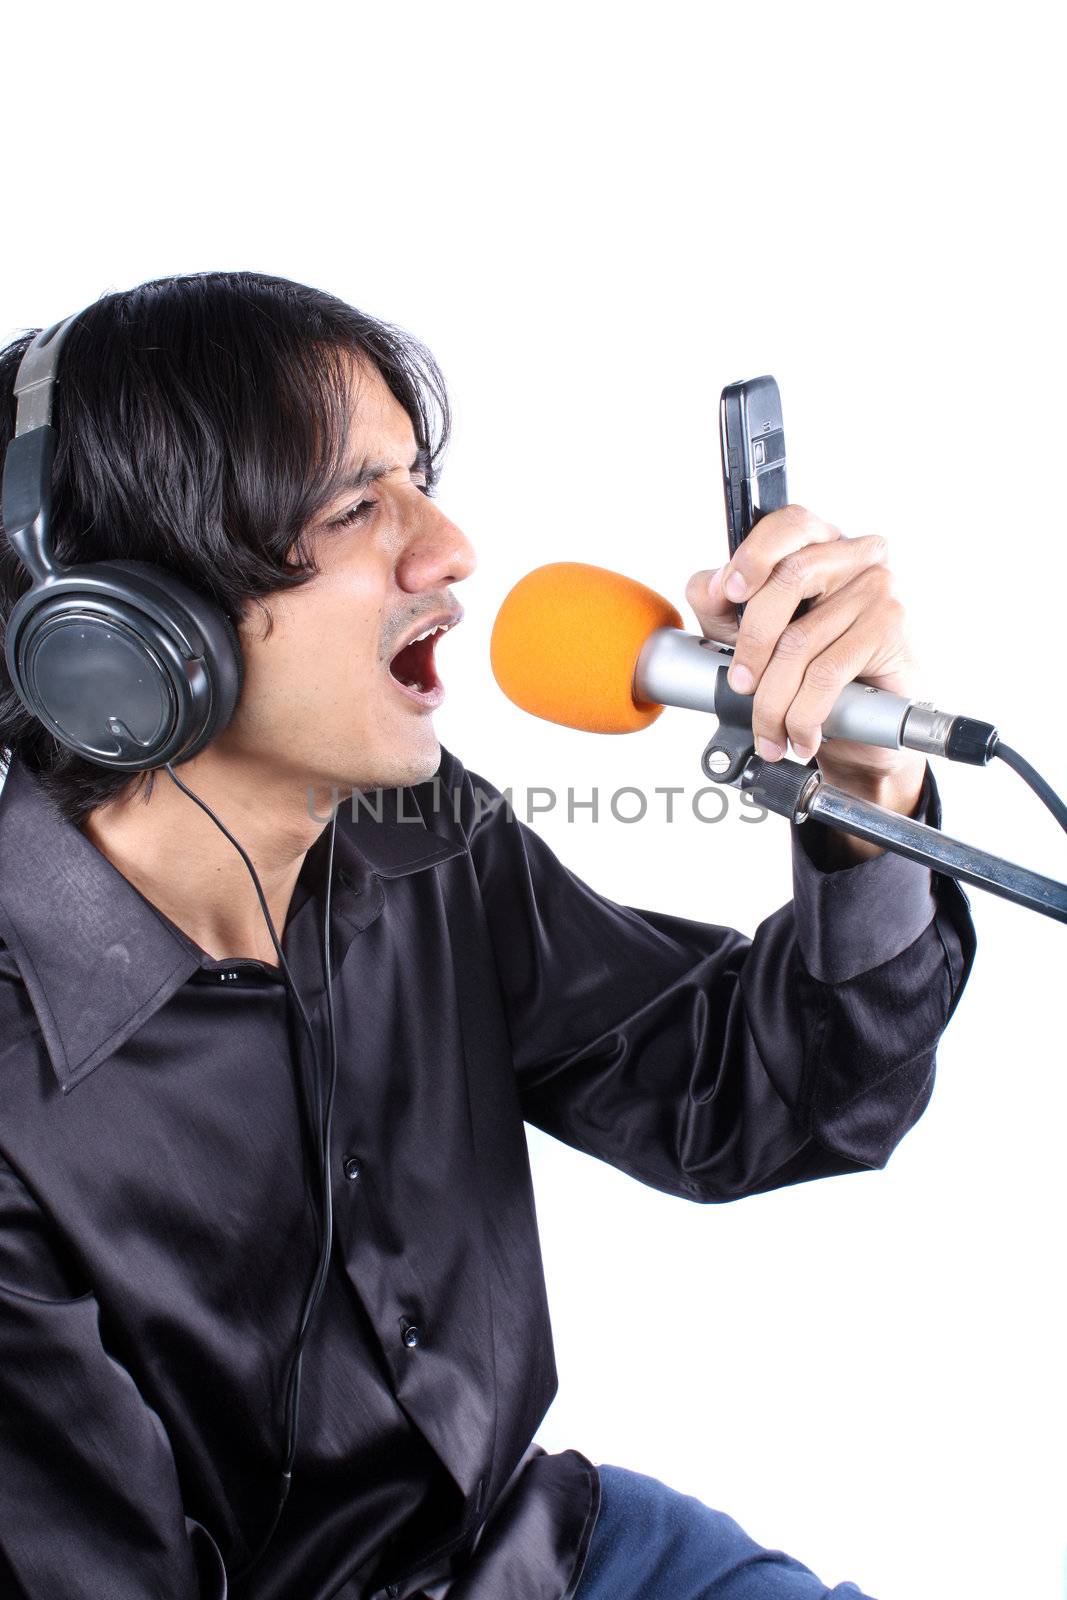 A metaphorical image of a singer recording a ringtone / dialler-tone for a record company in music studio, on white studio background.